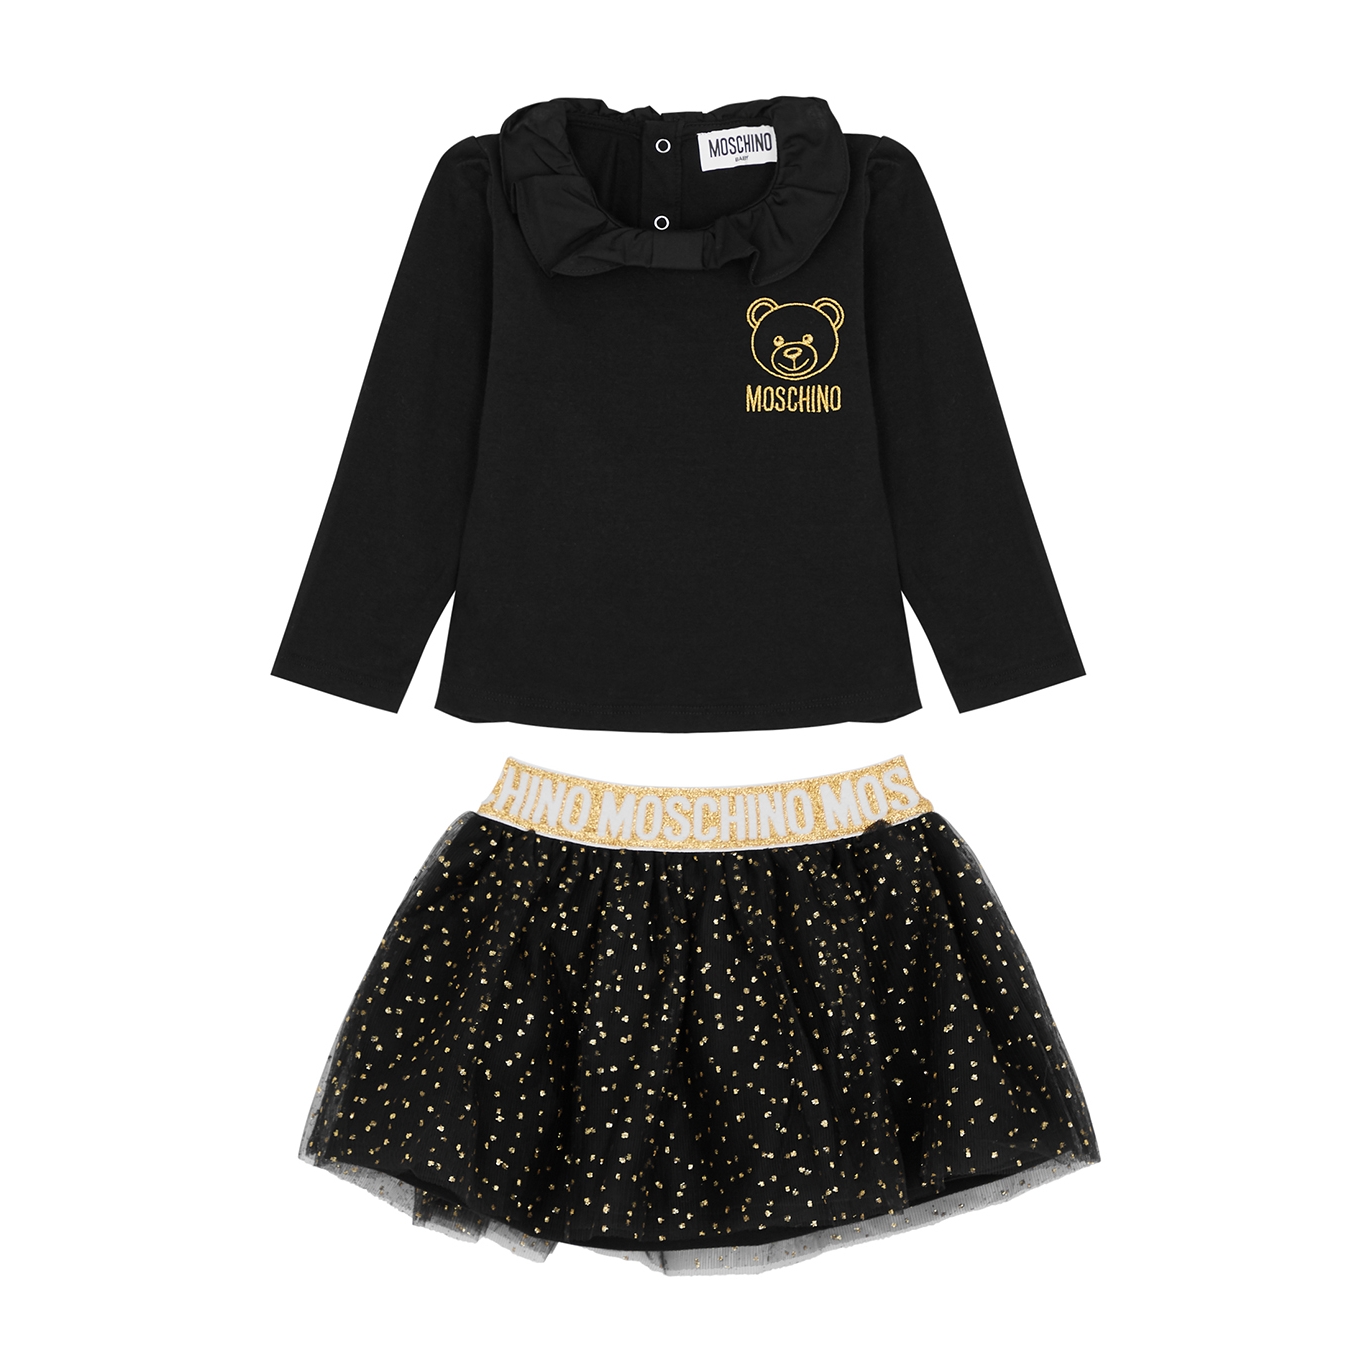 Moschino Kids Black Stretch-cotton Top And Tulle Skirt Set - Black/Gold